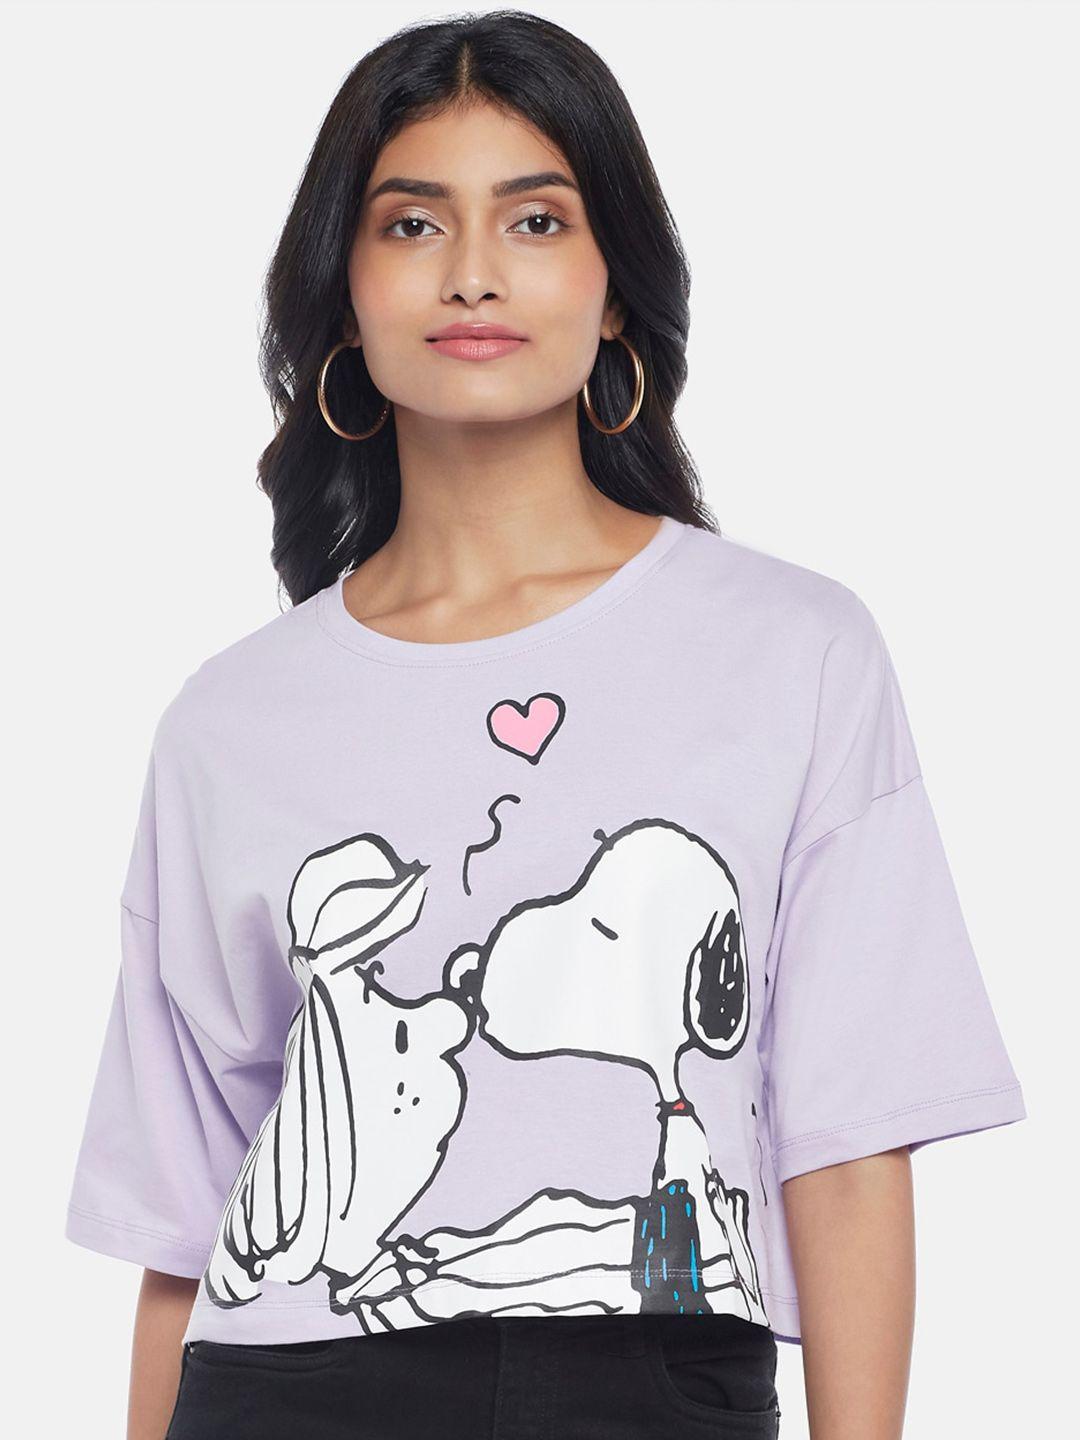 honey by pantaloons snoopy graphic printed cotton crop top